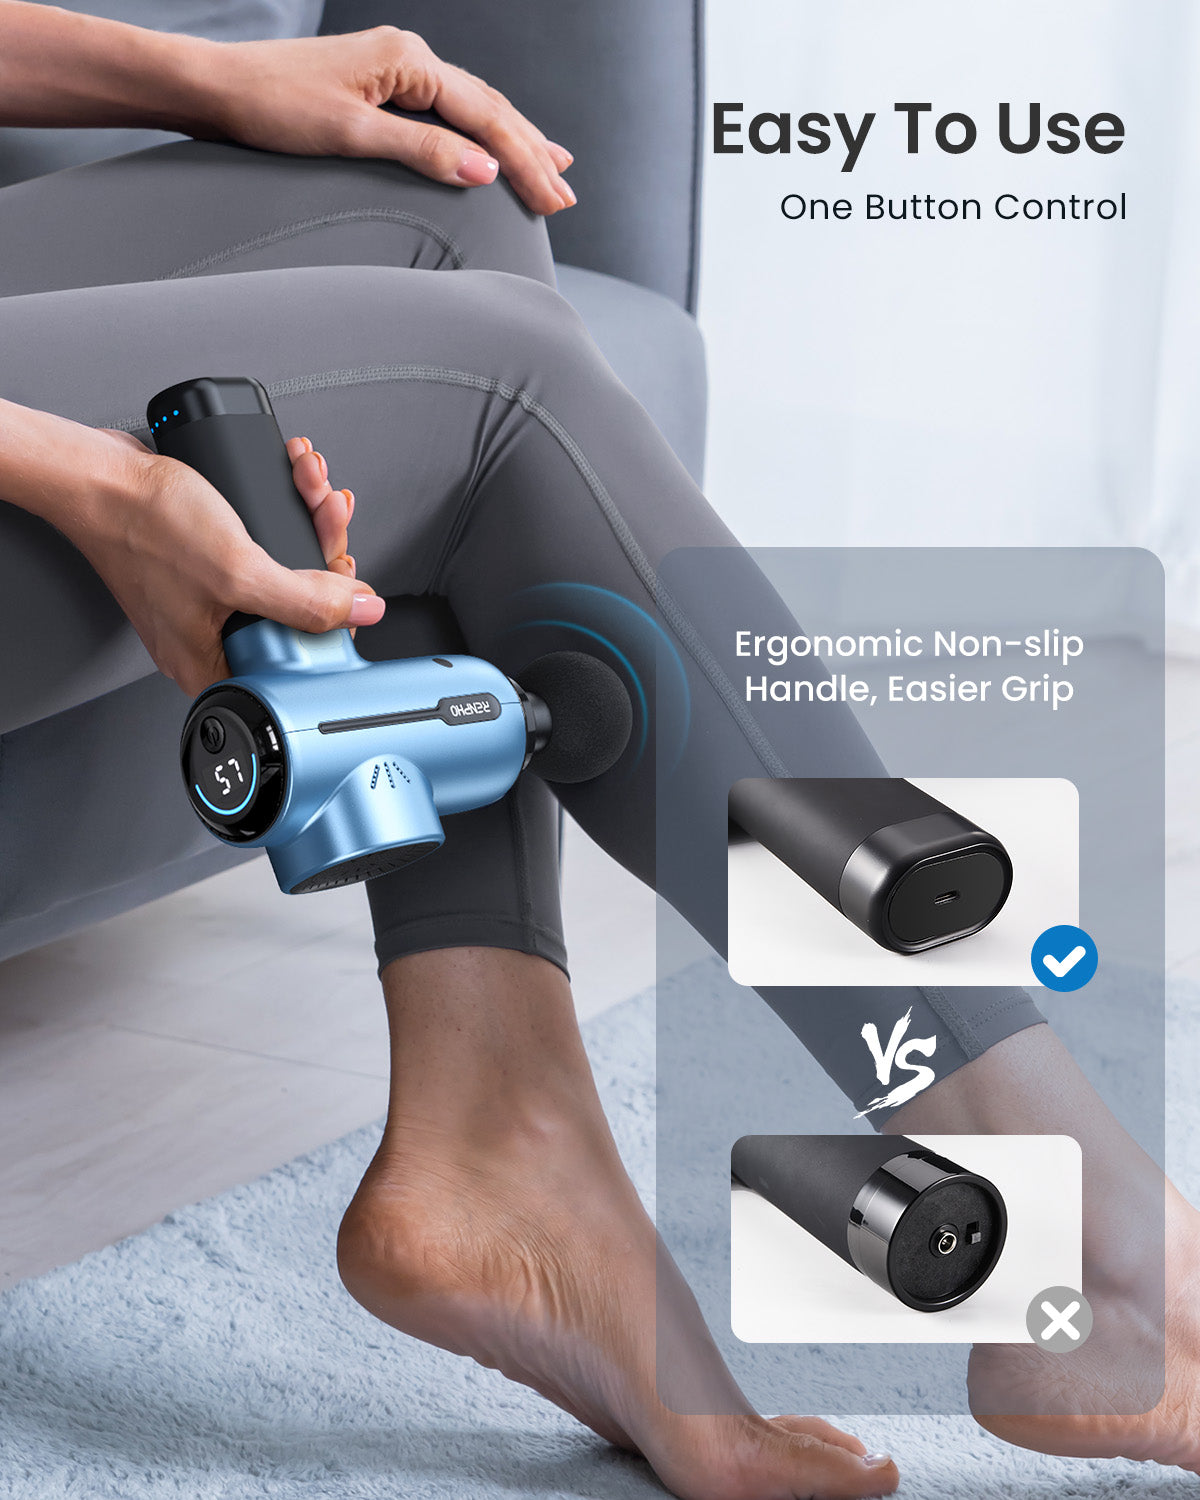 A person uses a Renpho EU massage gun on their calf while sitting. The design highlights features like "easy to use" and a "non-slip handle." Comparative visuals accentuate the ergonomic grip versus conventional.